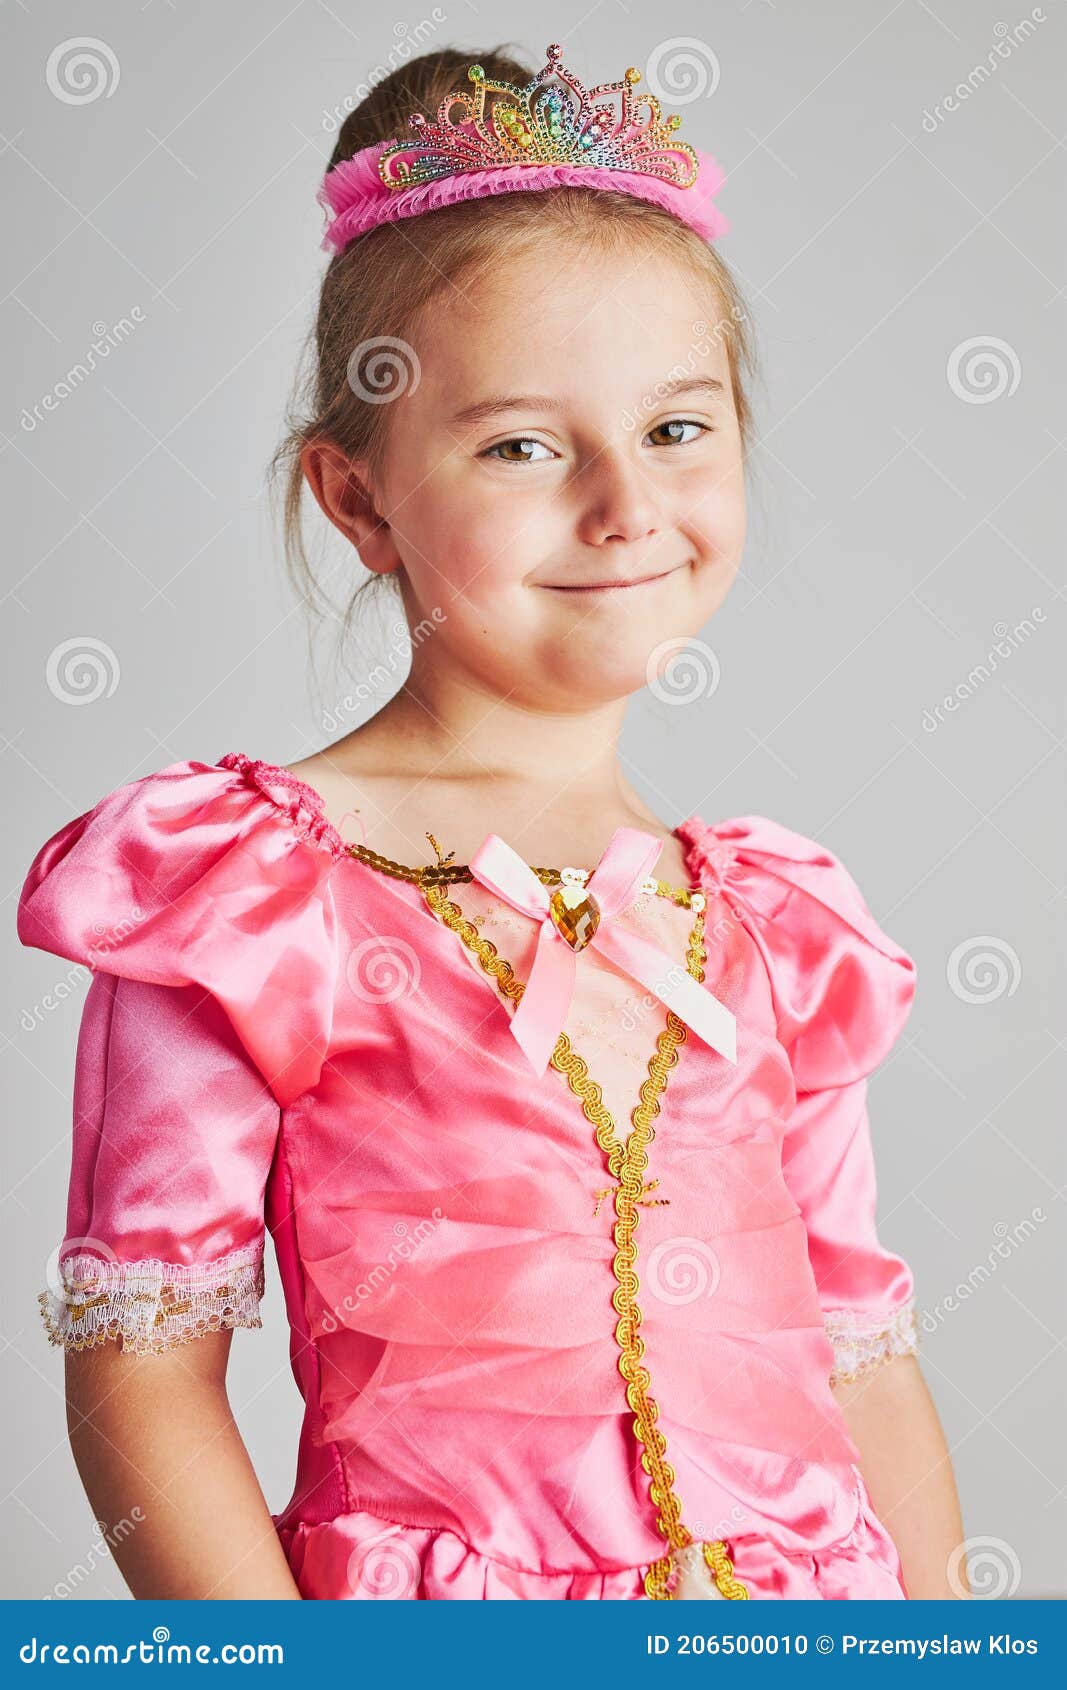 Little Girl Enjoying Her Role of Princess. Adorable Cute 5-6 Years Old Girl  Wearing Pink Princess Dress and Crown Stock Photo - Image of birthday,  background: 206500010